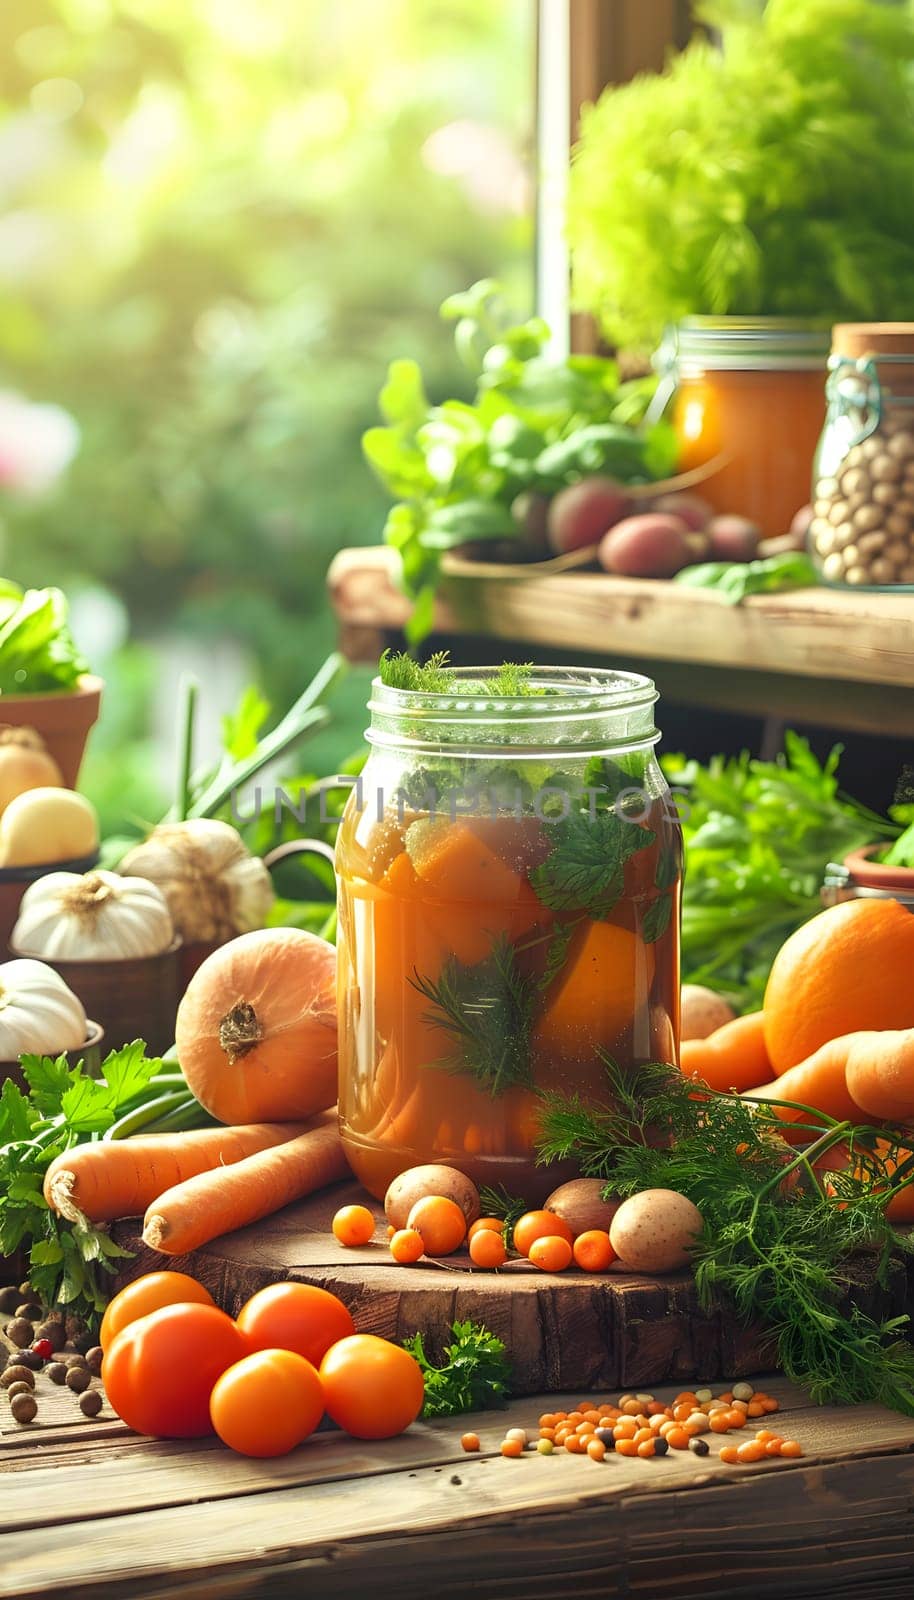 A jar of pickled carrots among vibrant vegetables on a wooden table by Nadtochiy